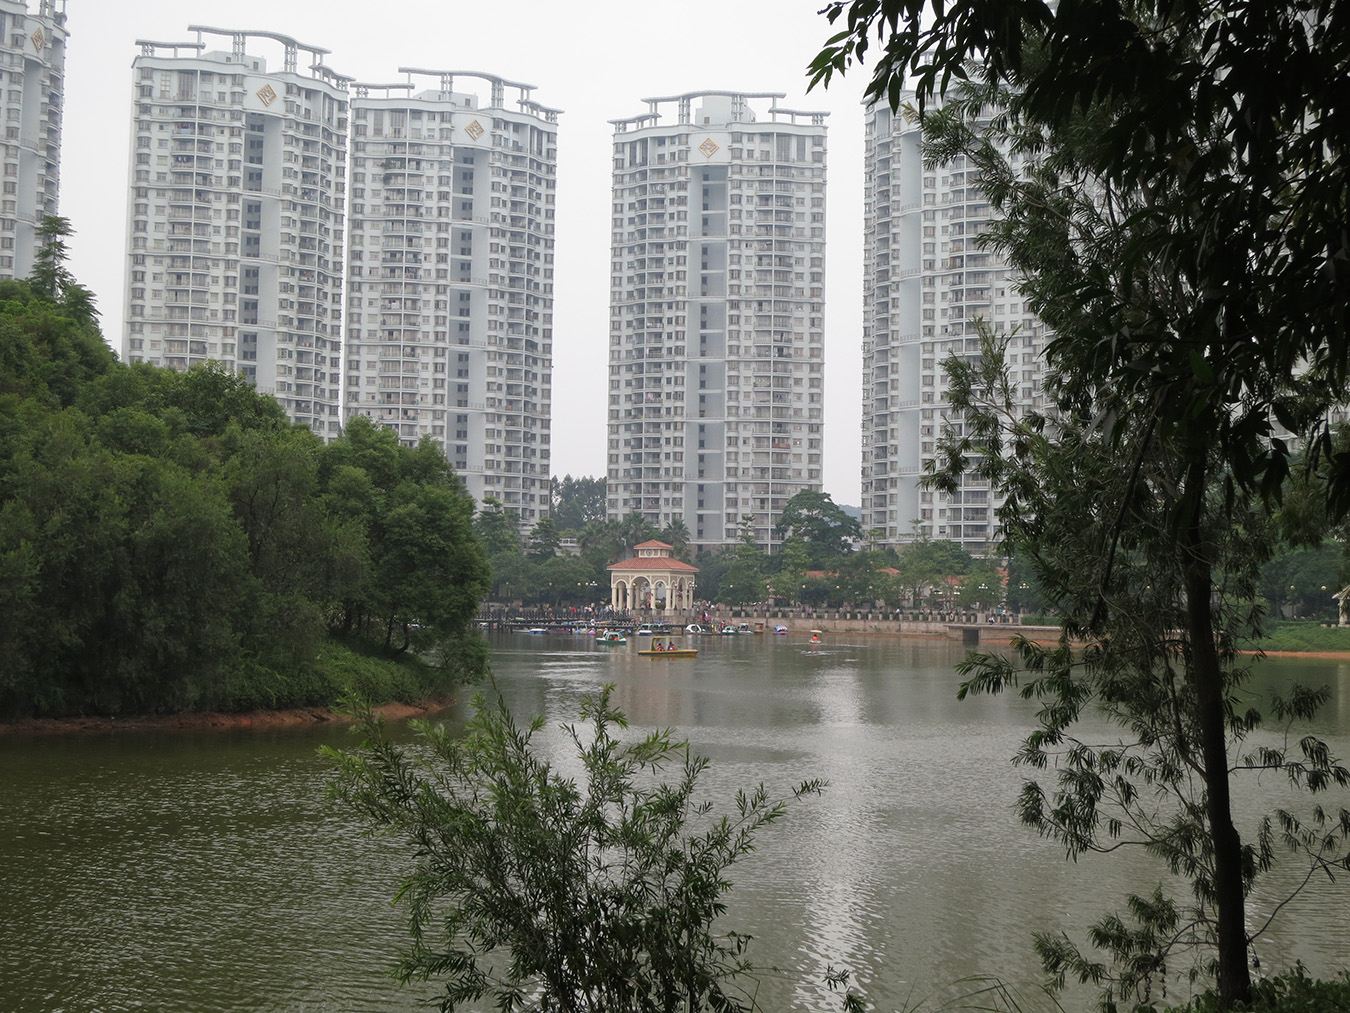 A sanitized, green aesthetic is characteristic of many gated communities in China.
Photo by Amy Zhang.